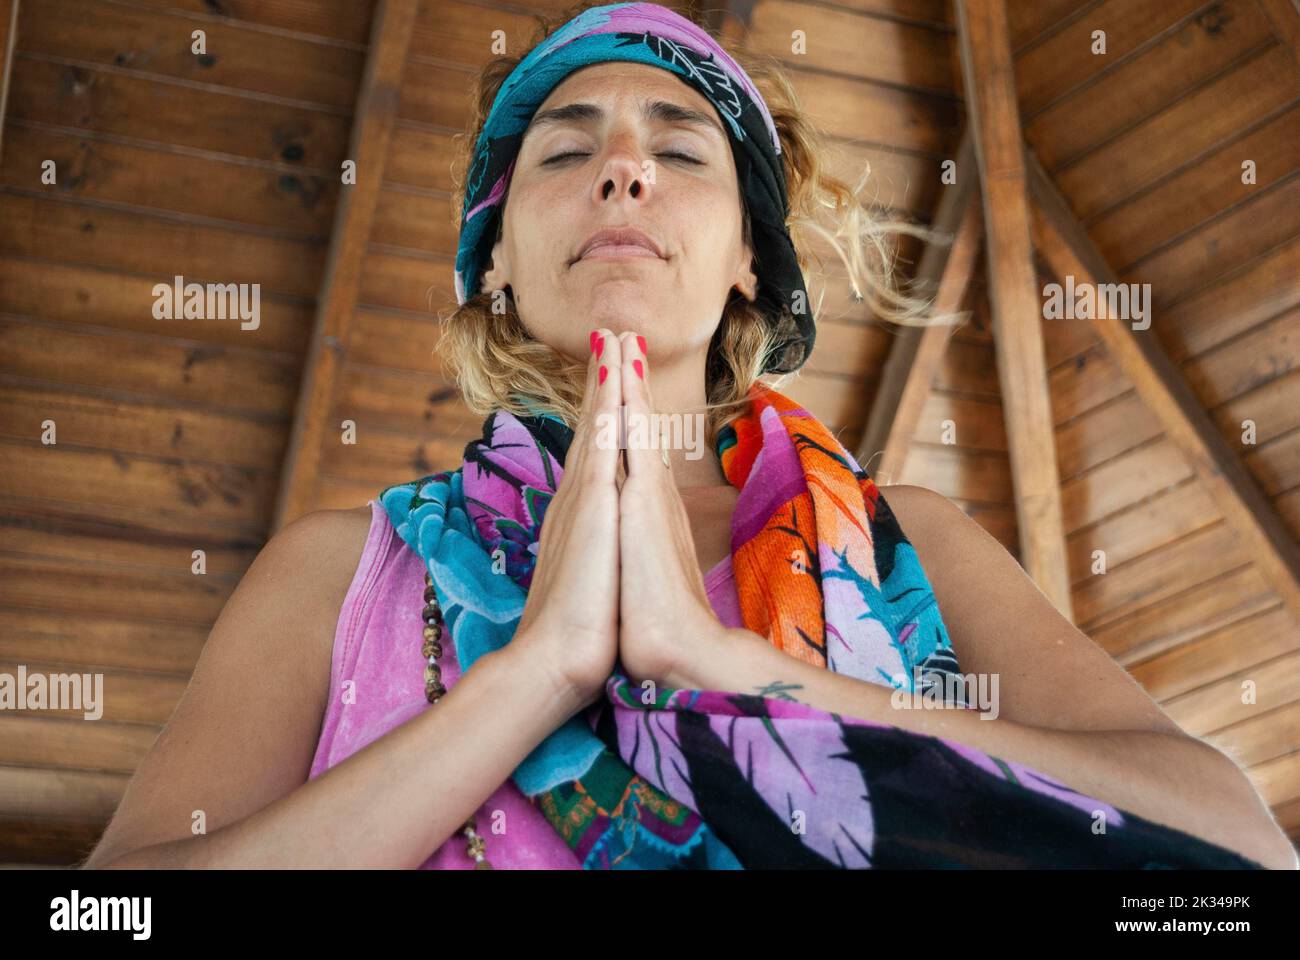 Low angle view of a woman clasping hands and wearing a bandana while meditating Stock Photo